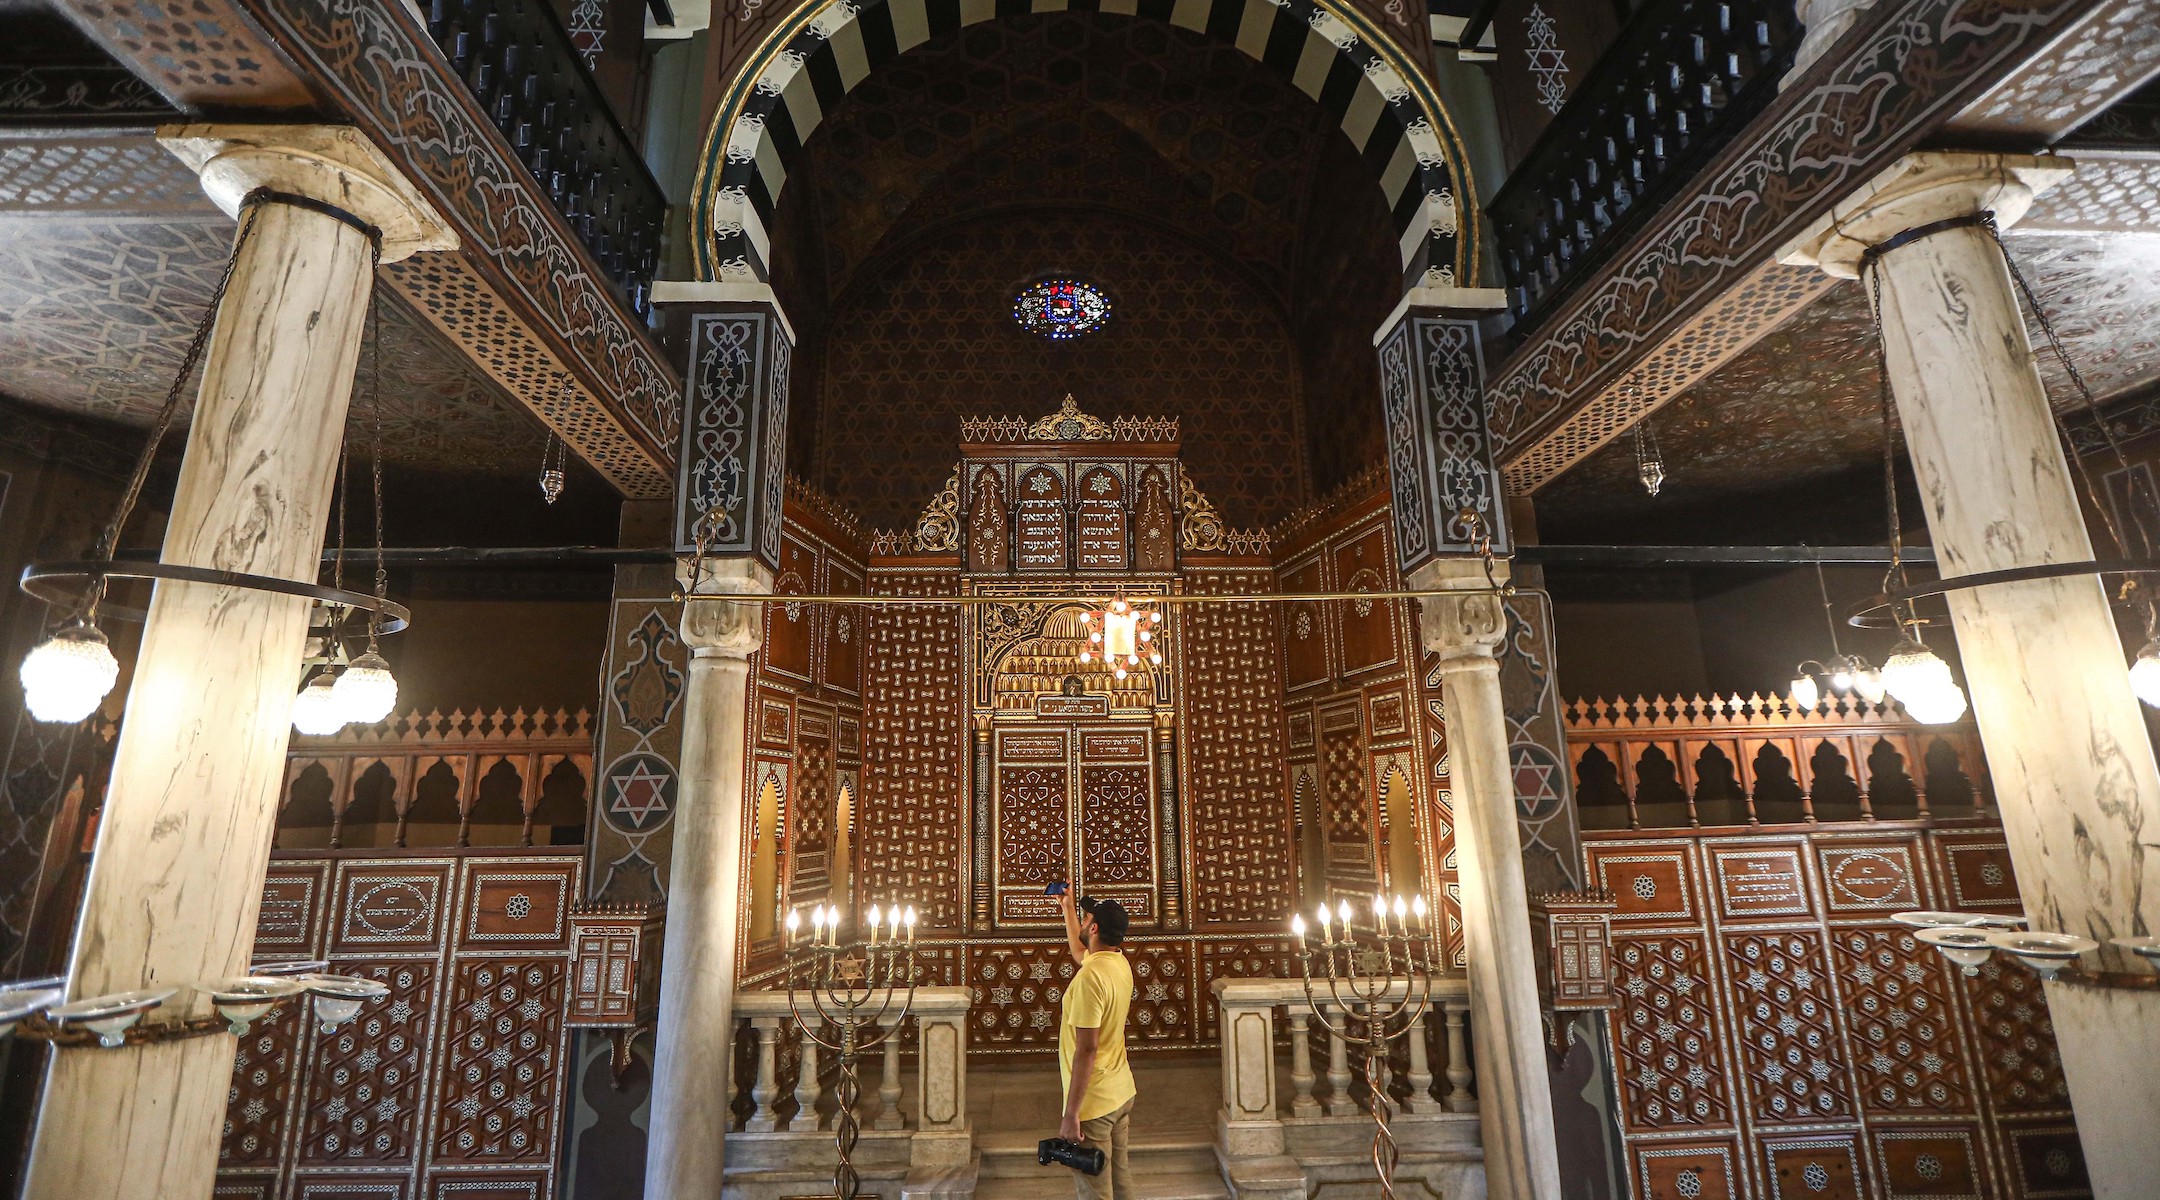 A man takes photos inside the Jewish Ben Ezra Synagogue after its restoration in Cairo, Sept. 1, 2023. (Ahmed Gomaa/Xinhua via Getty Images)